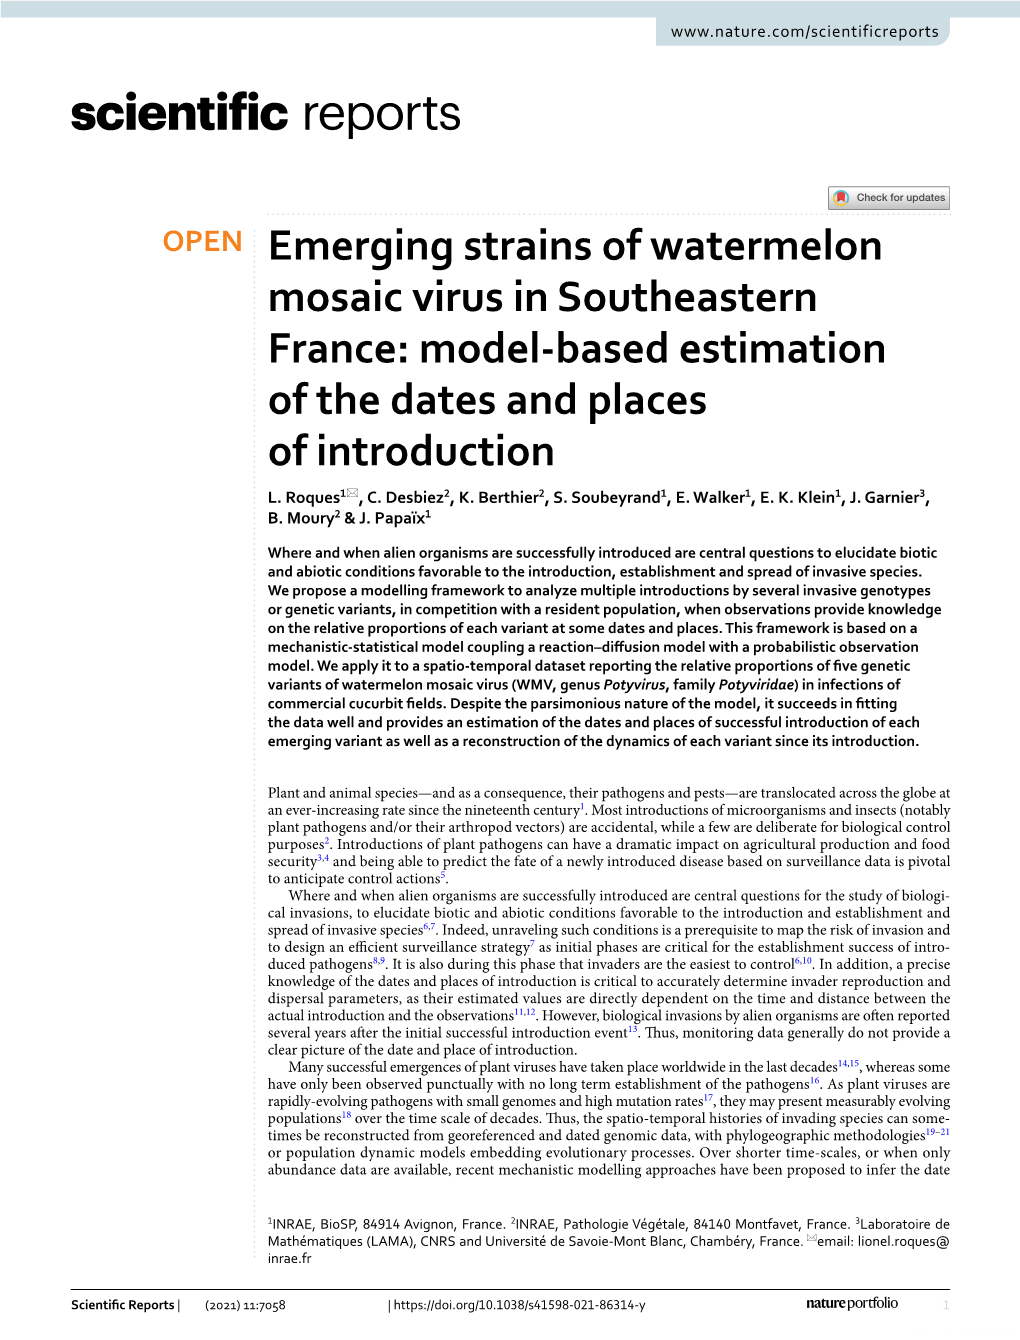 Emerging Strains of Watermelon Mosaic Virus in Southeastern France: Model‑Based Estimation of the Dates and Places of Introduction L